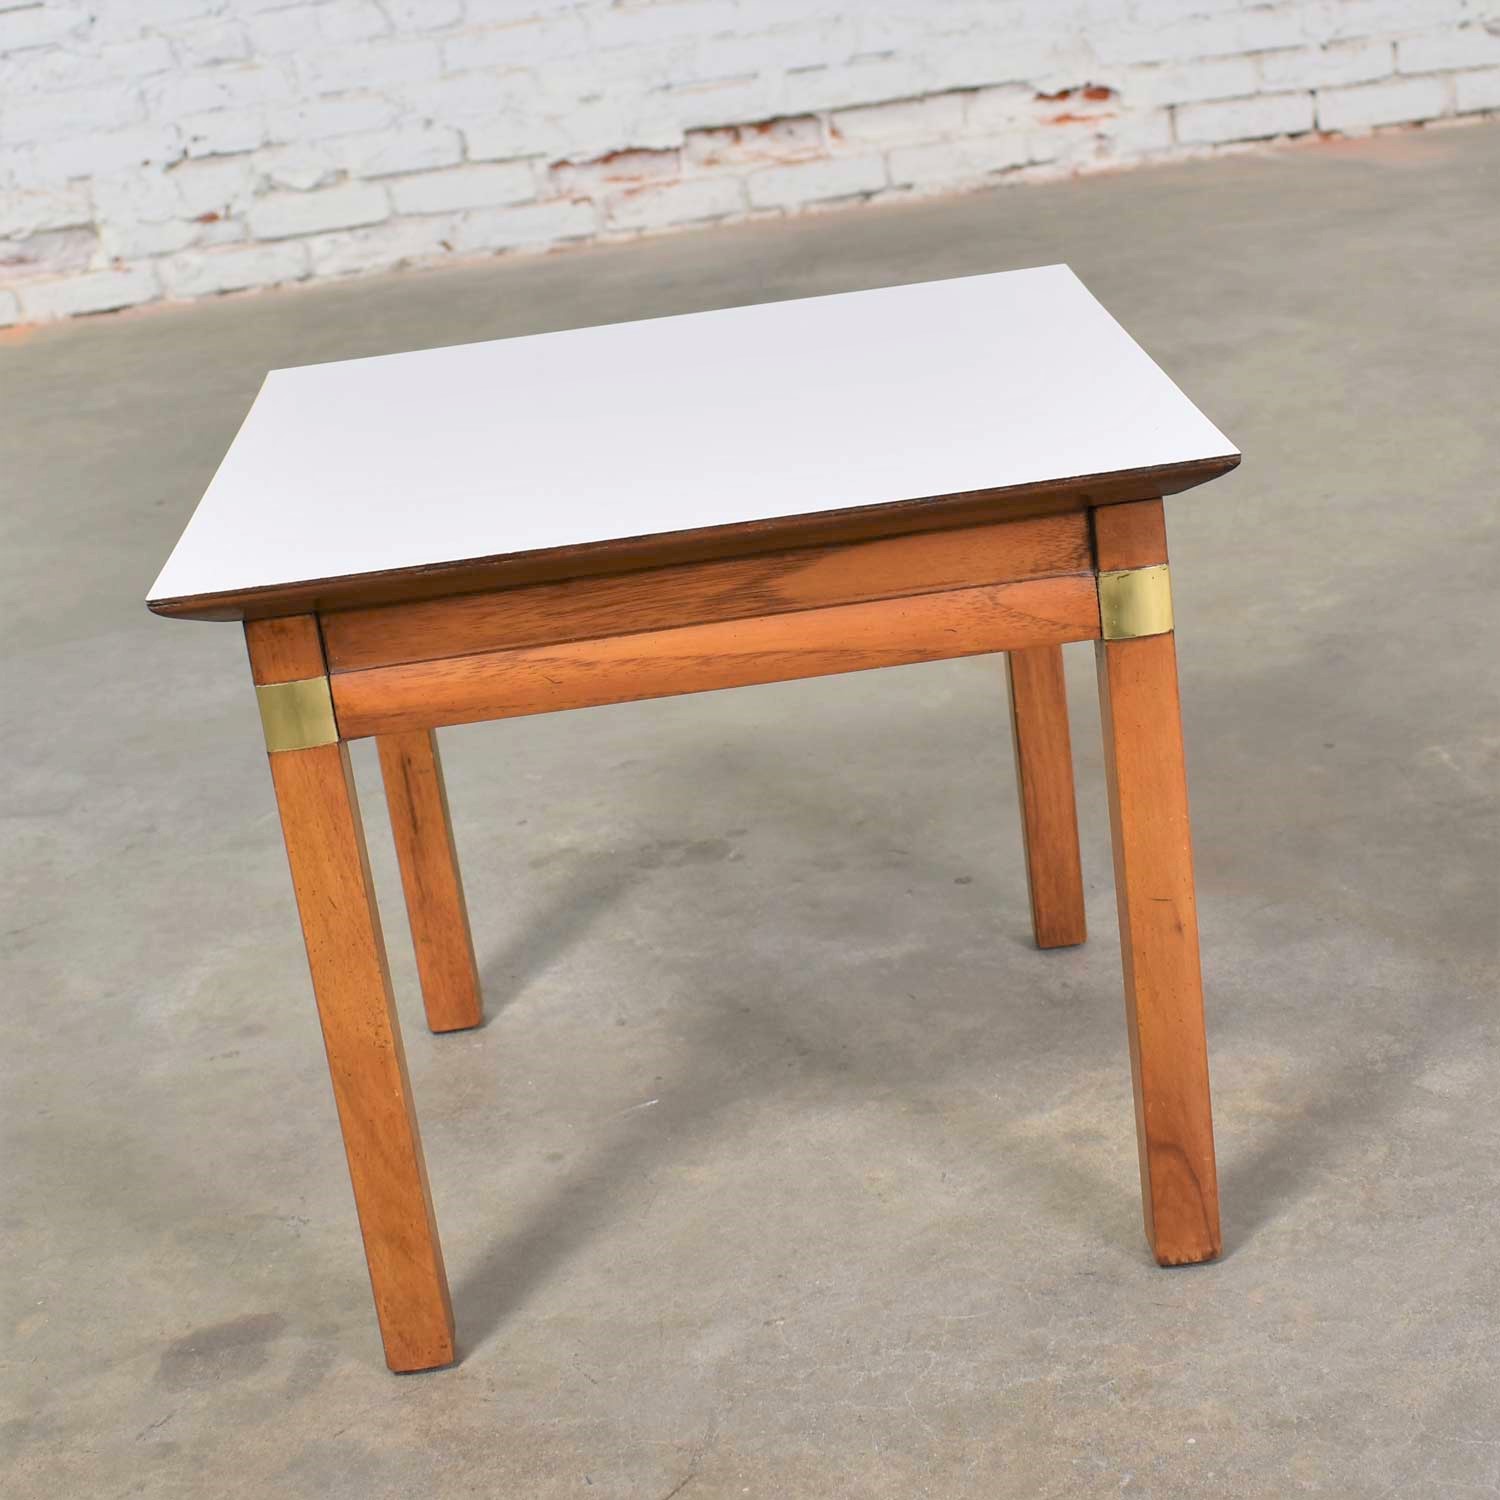 Campaign Style Square Side Table with White Laminate Top by Hickory Furniture Mfg.